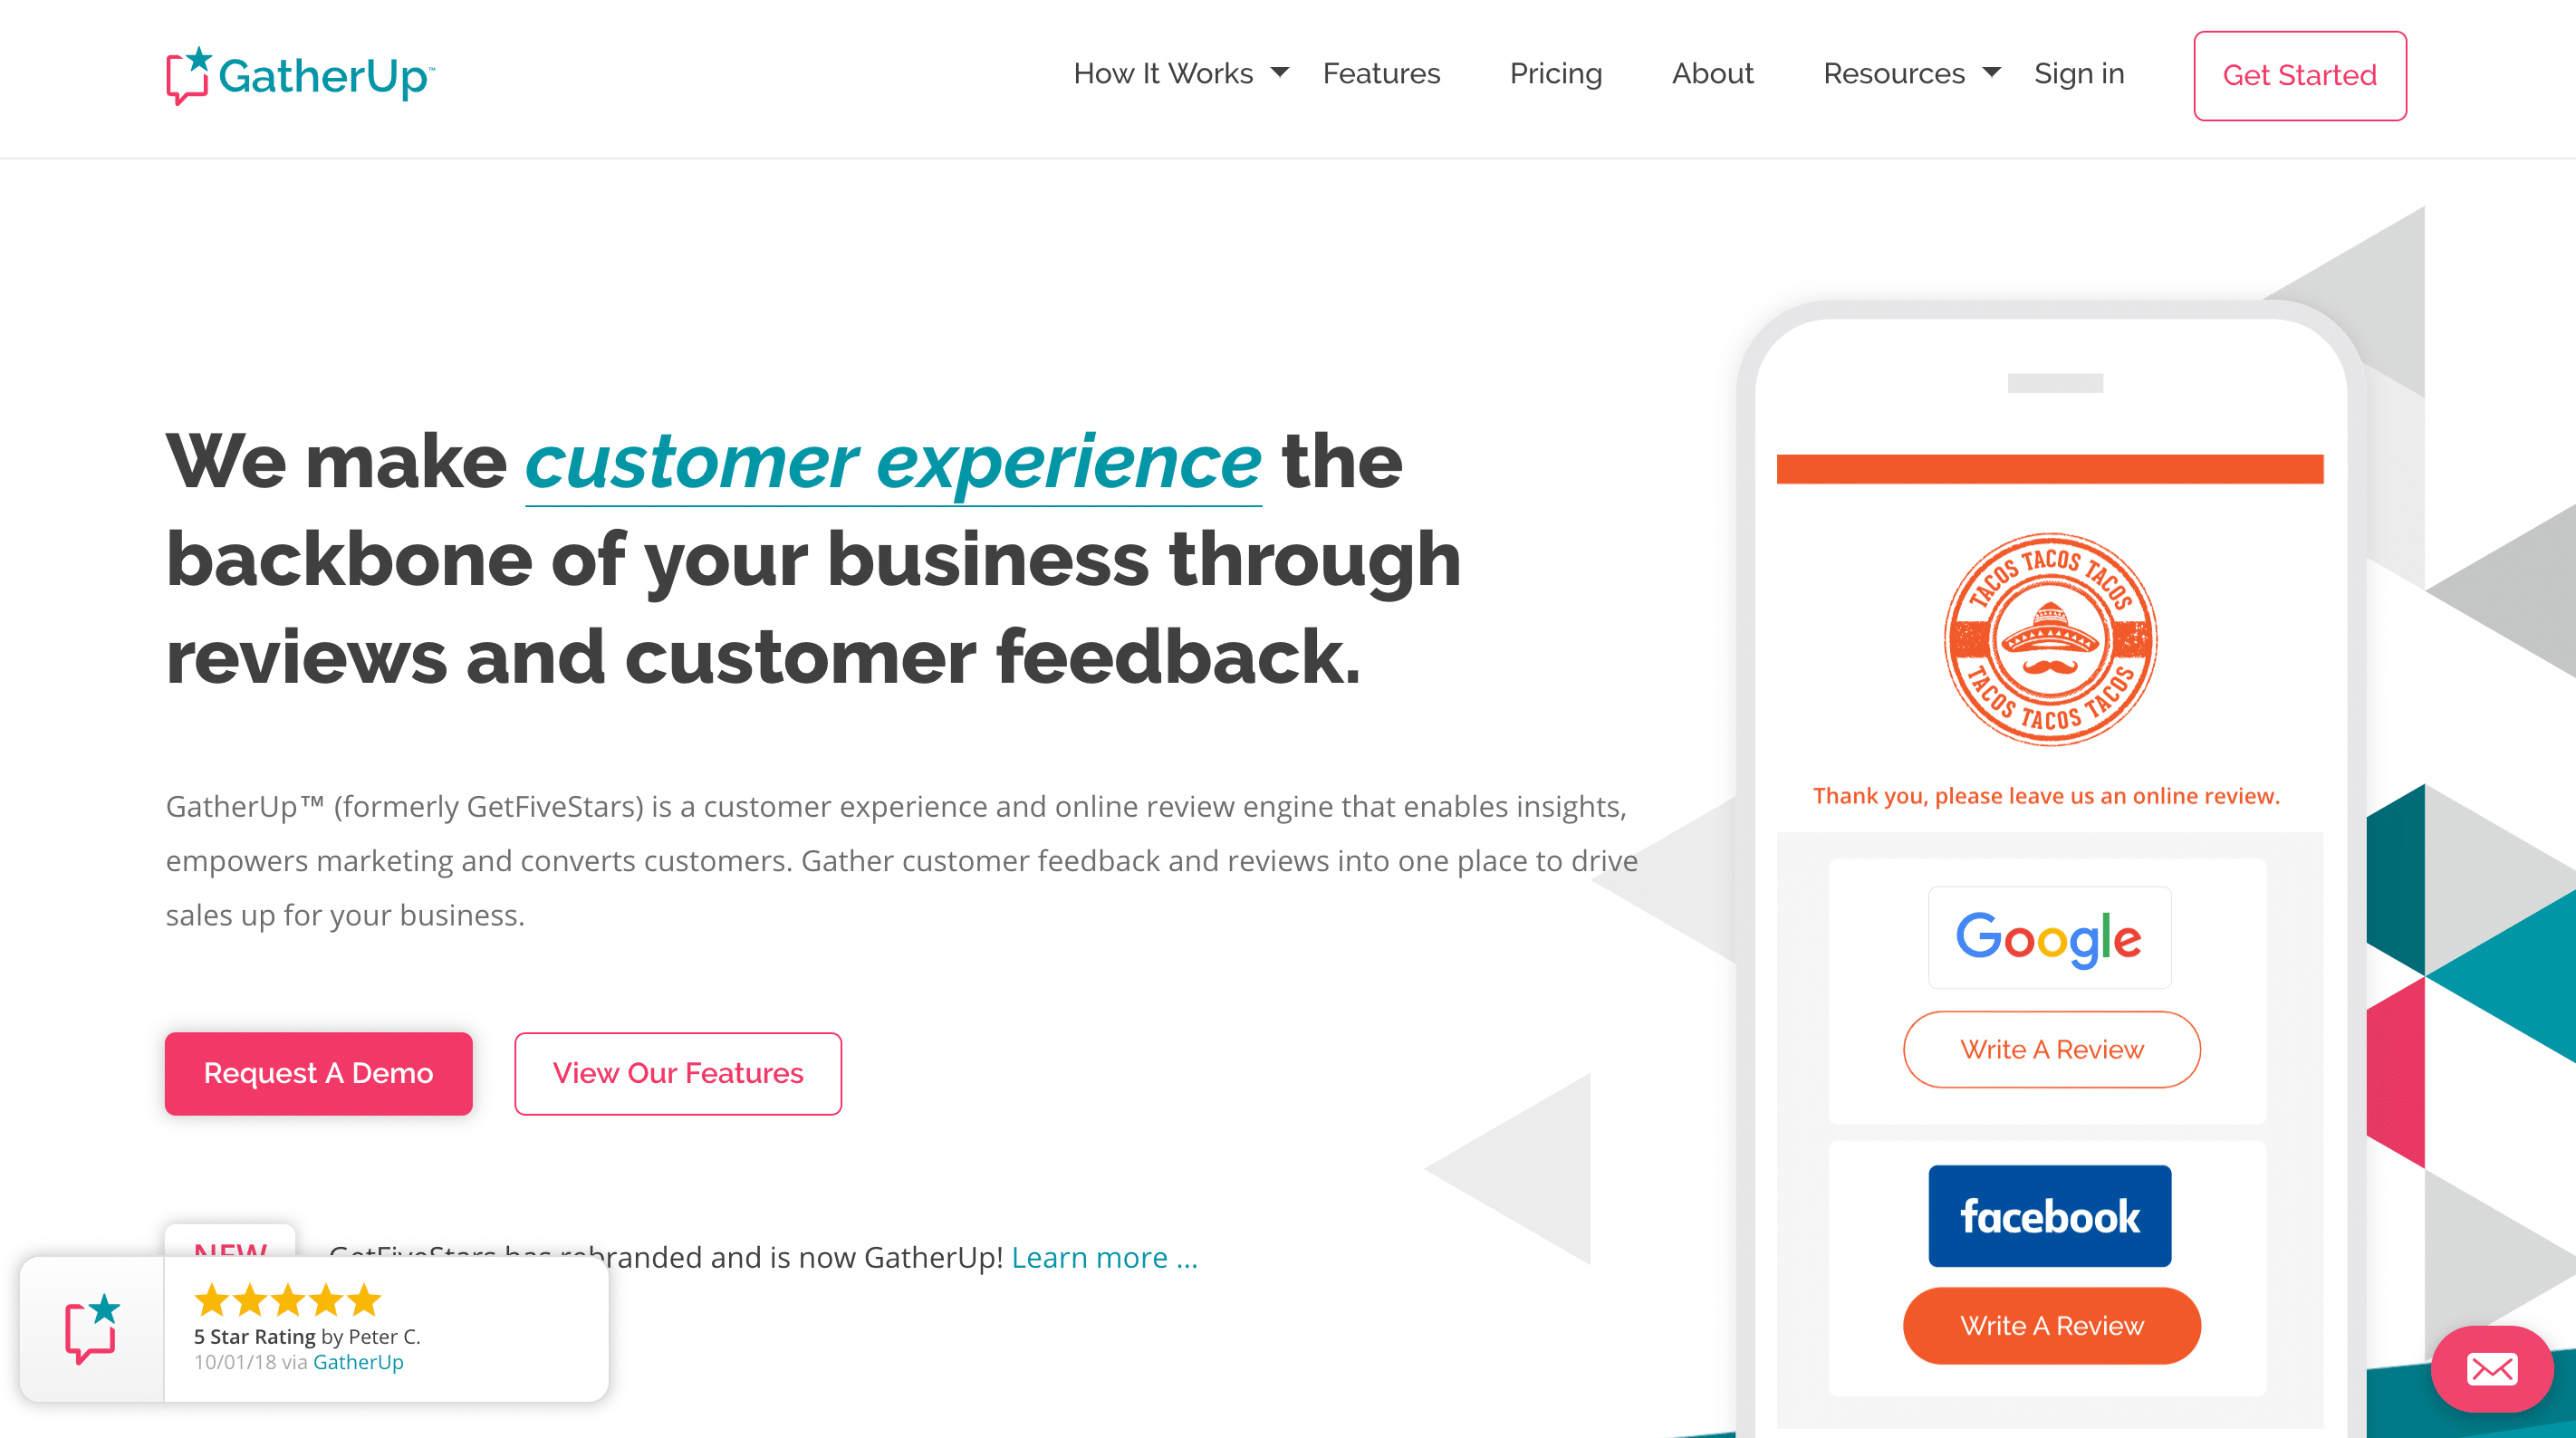 GatherUp Review Service for Local SEO